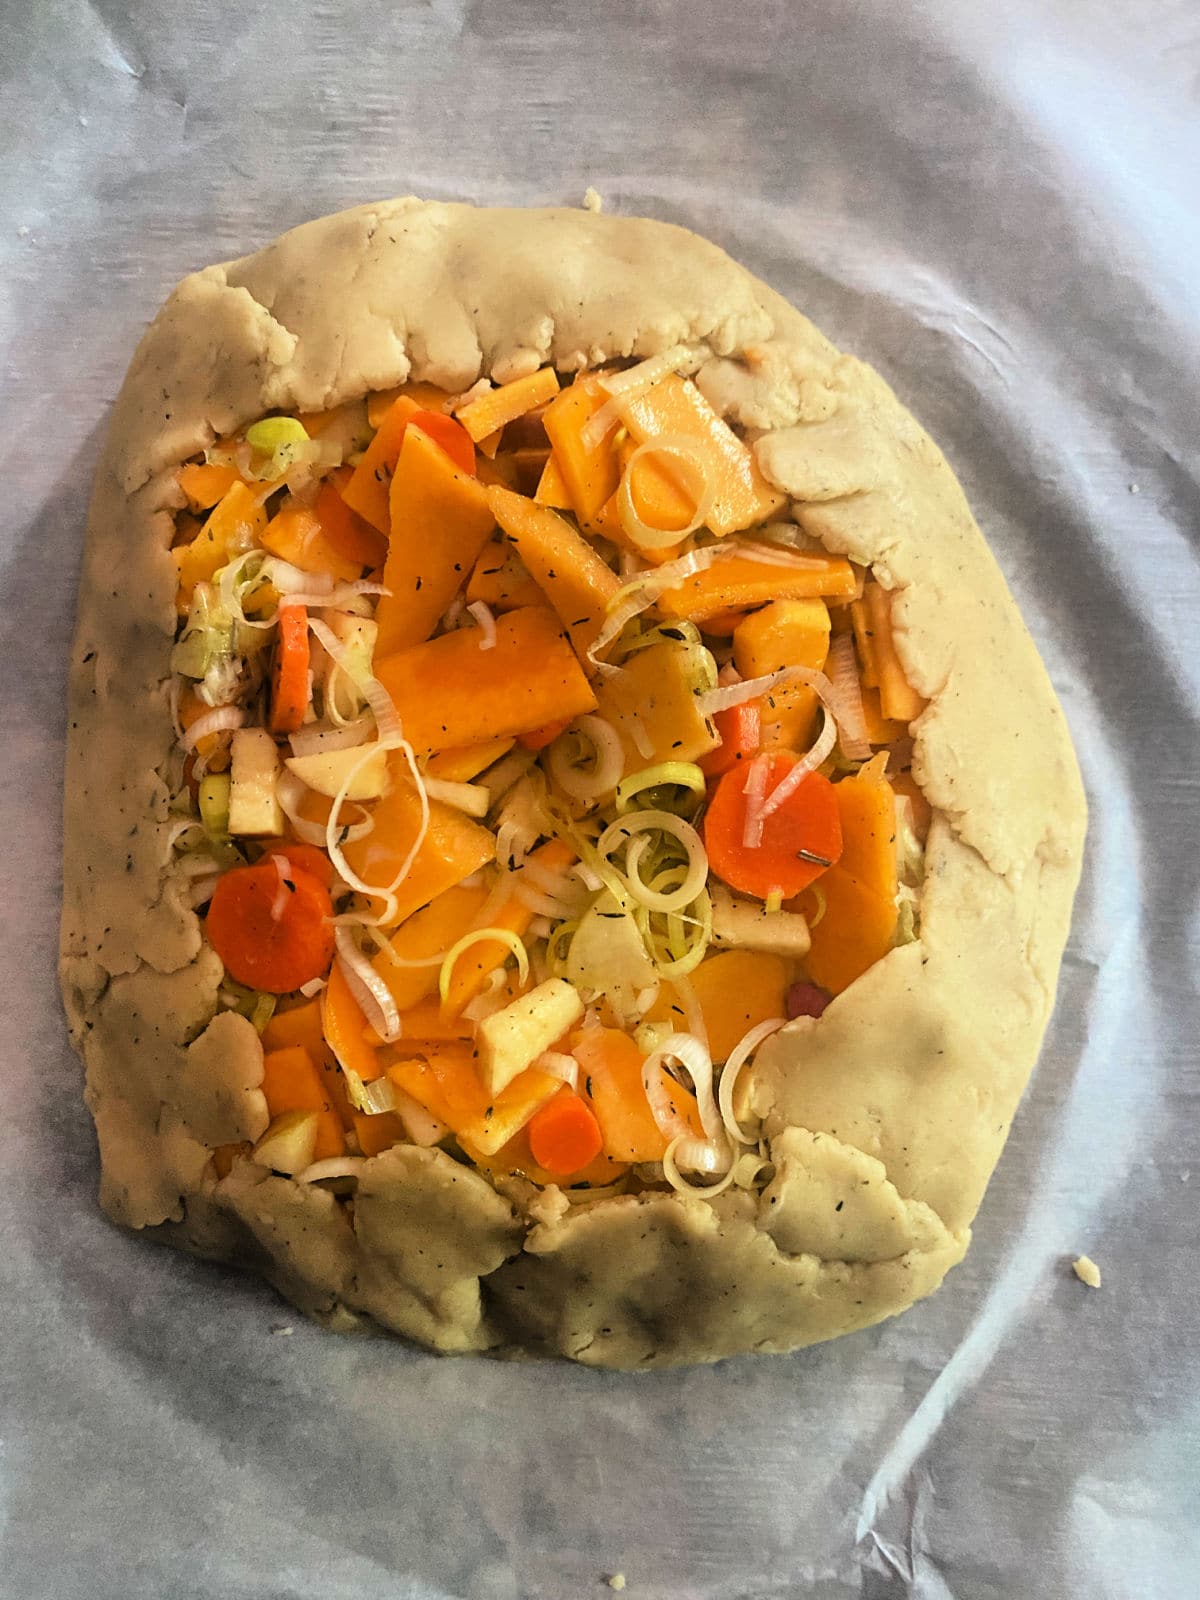 unbaked savory galette ready to go into the oven